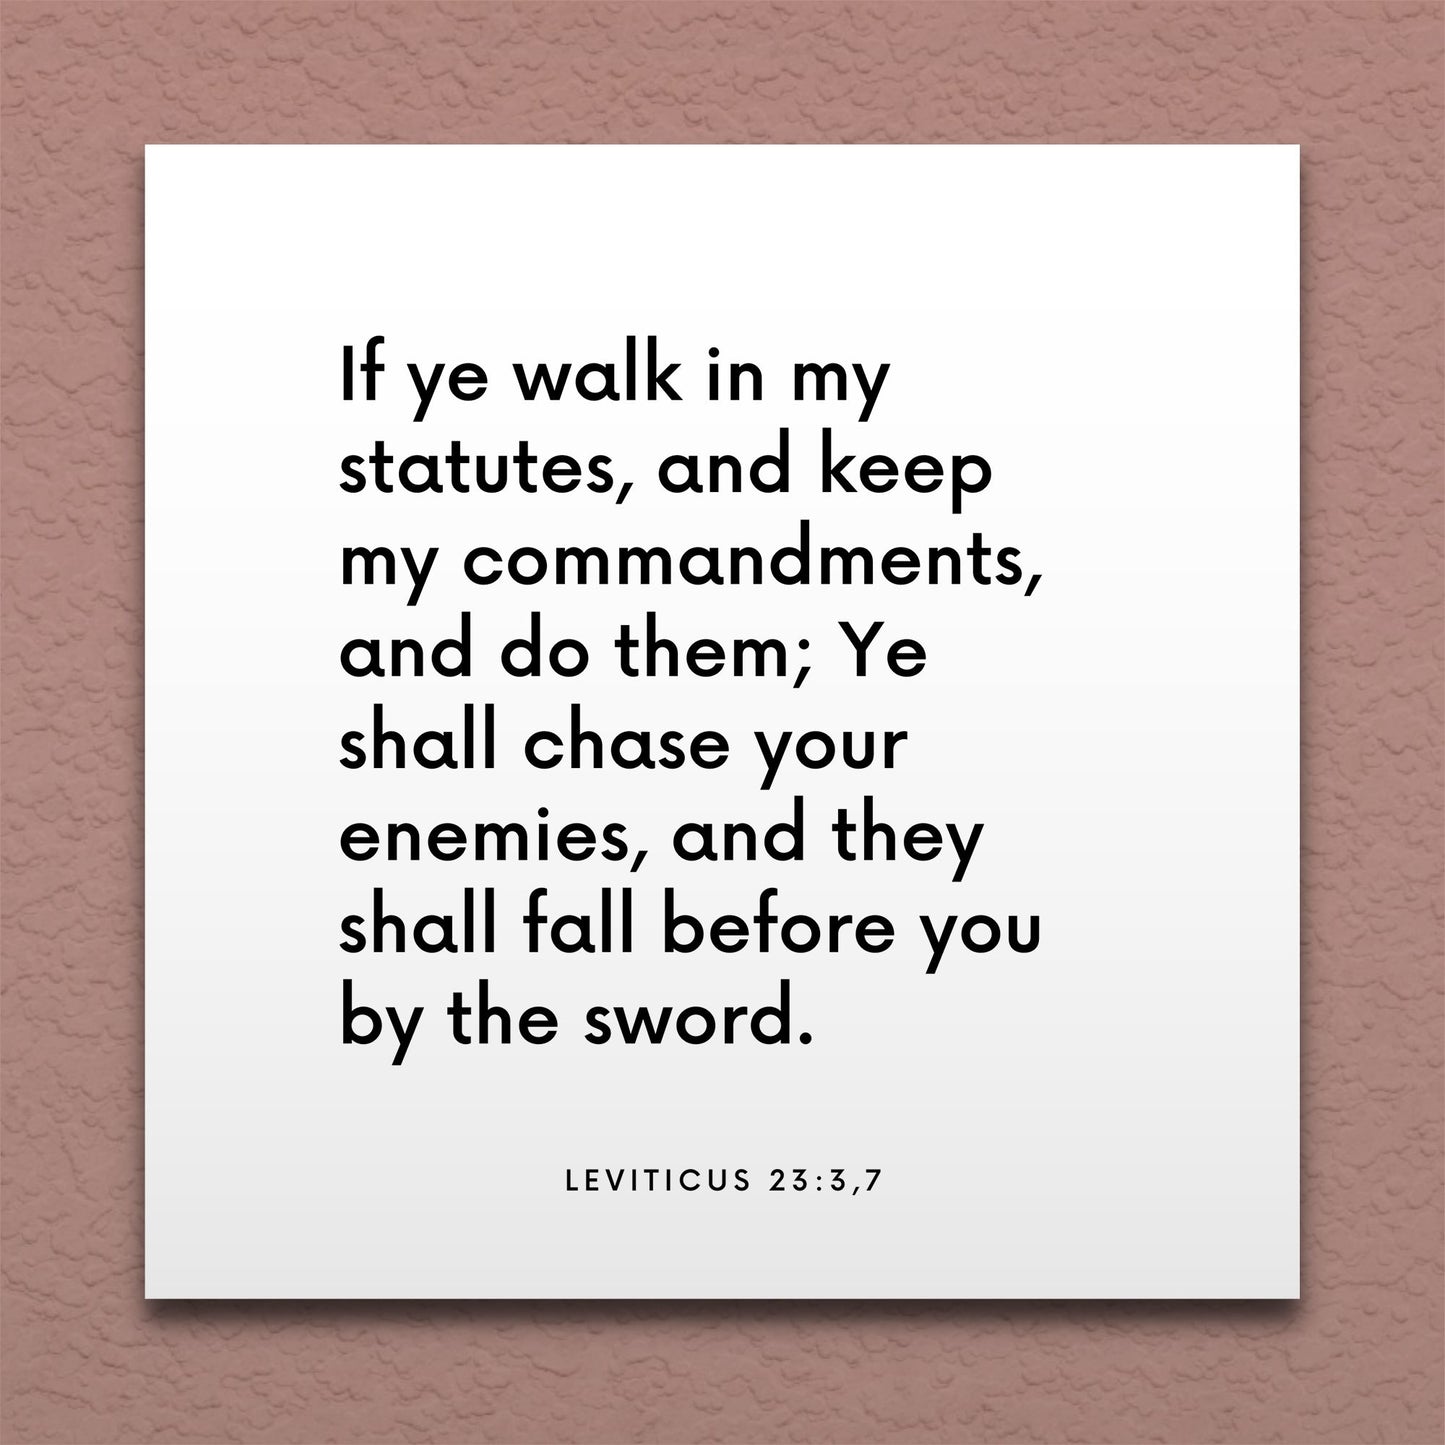 Wall-mounted scripture tile for Leviticus 23:3,7 - "Ye shall chase your enemies, and they shall fall before you"